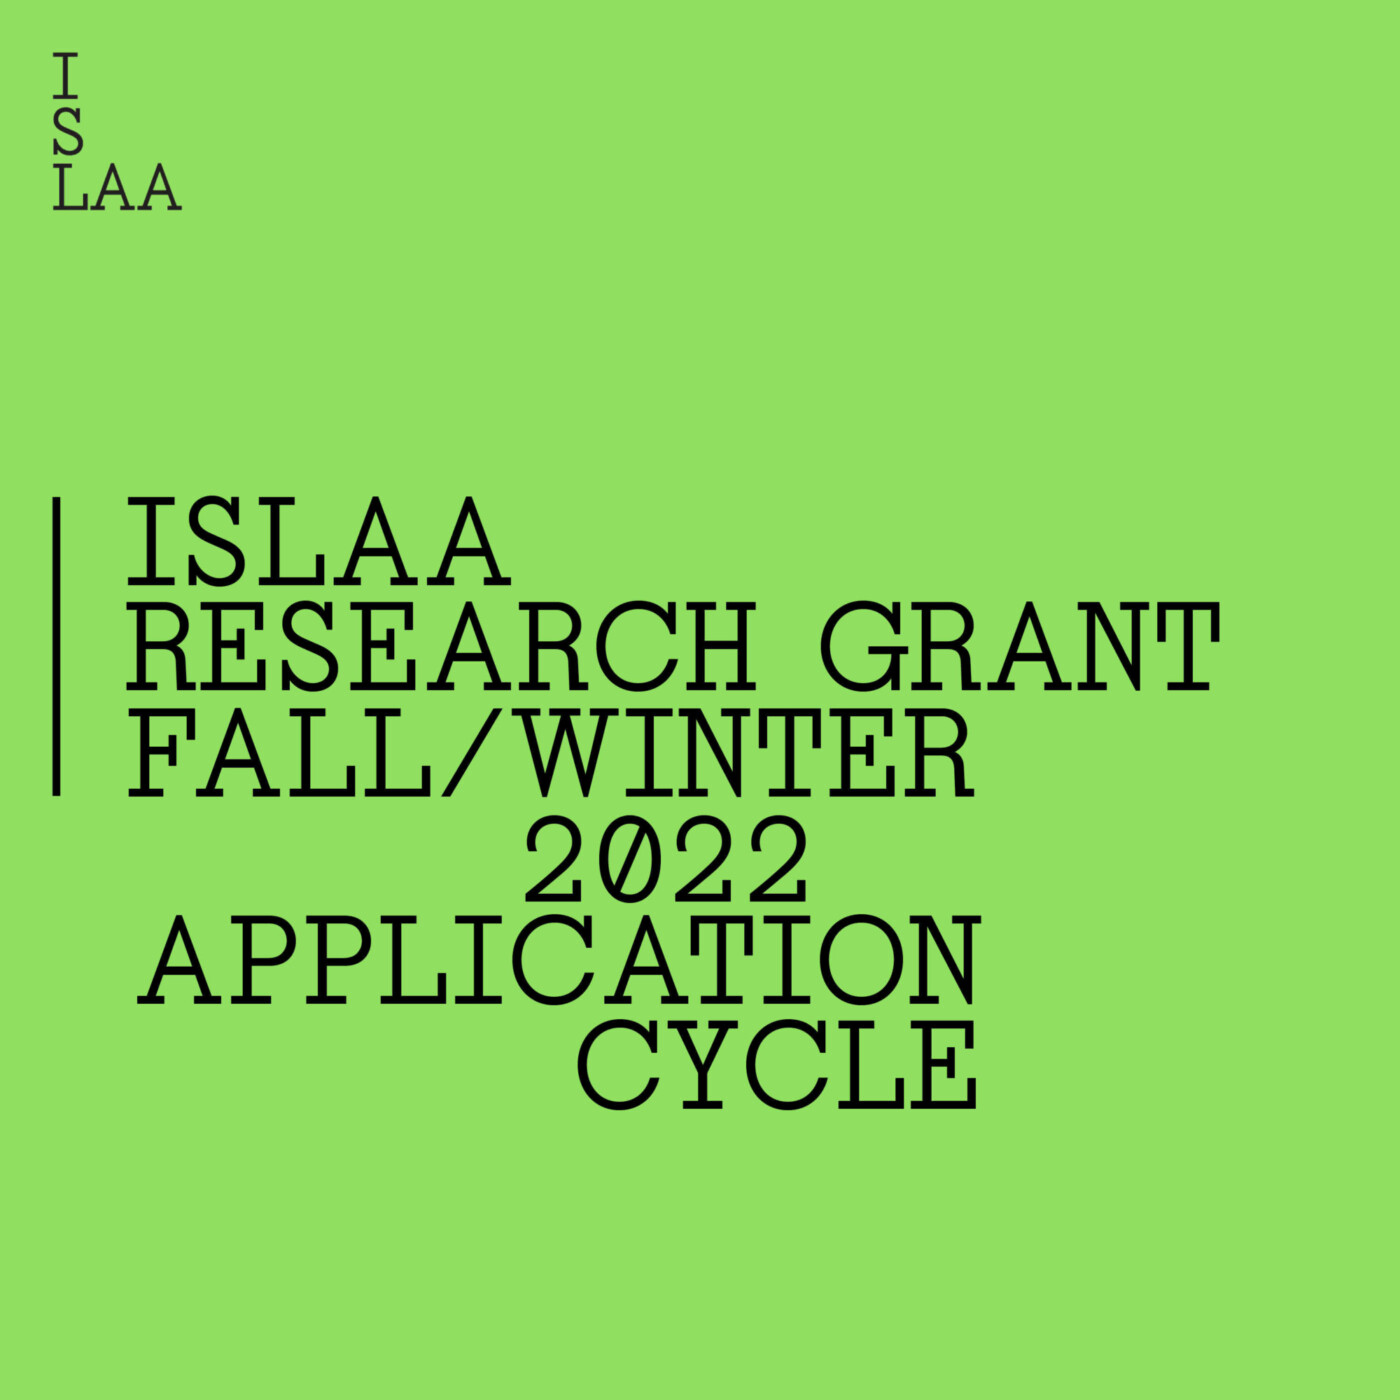 Green background flyer with ISLAA Research Grant Call for Proposals text